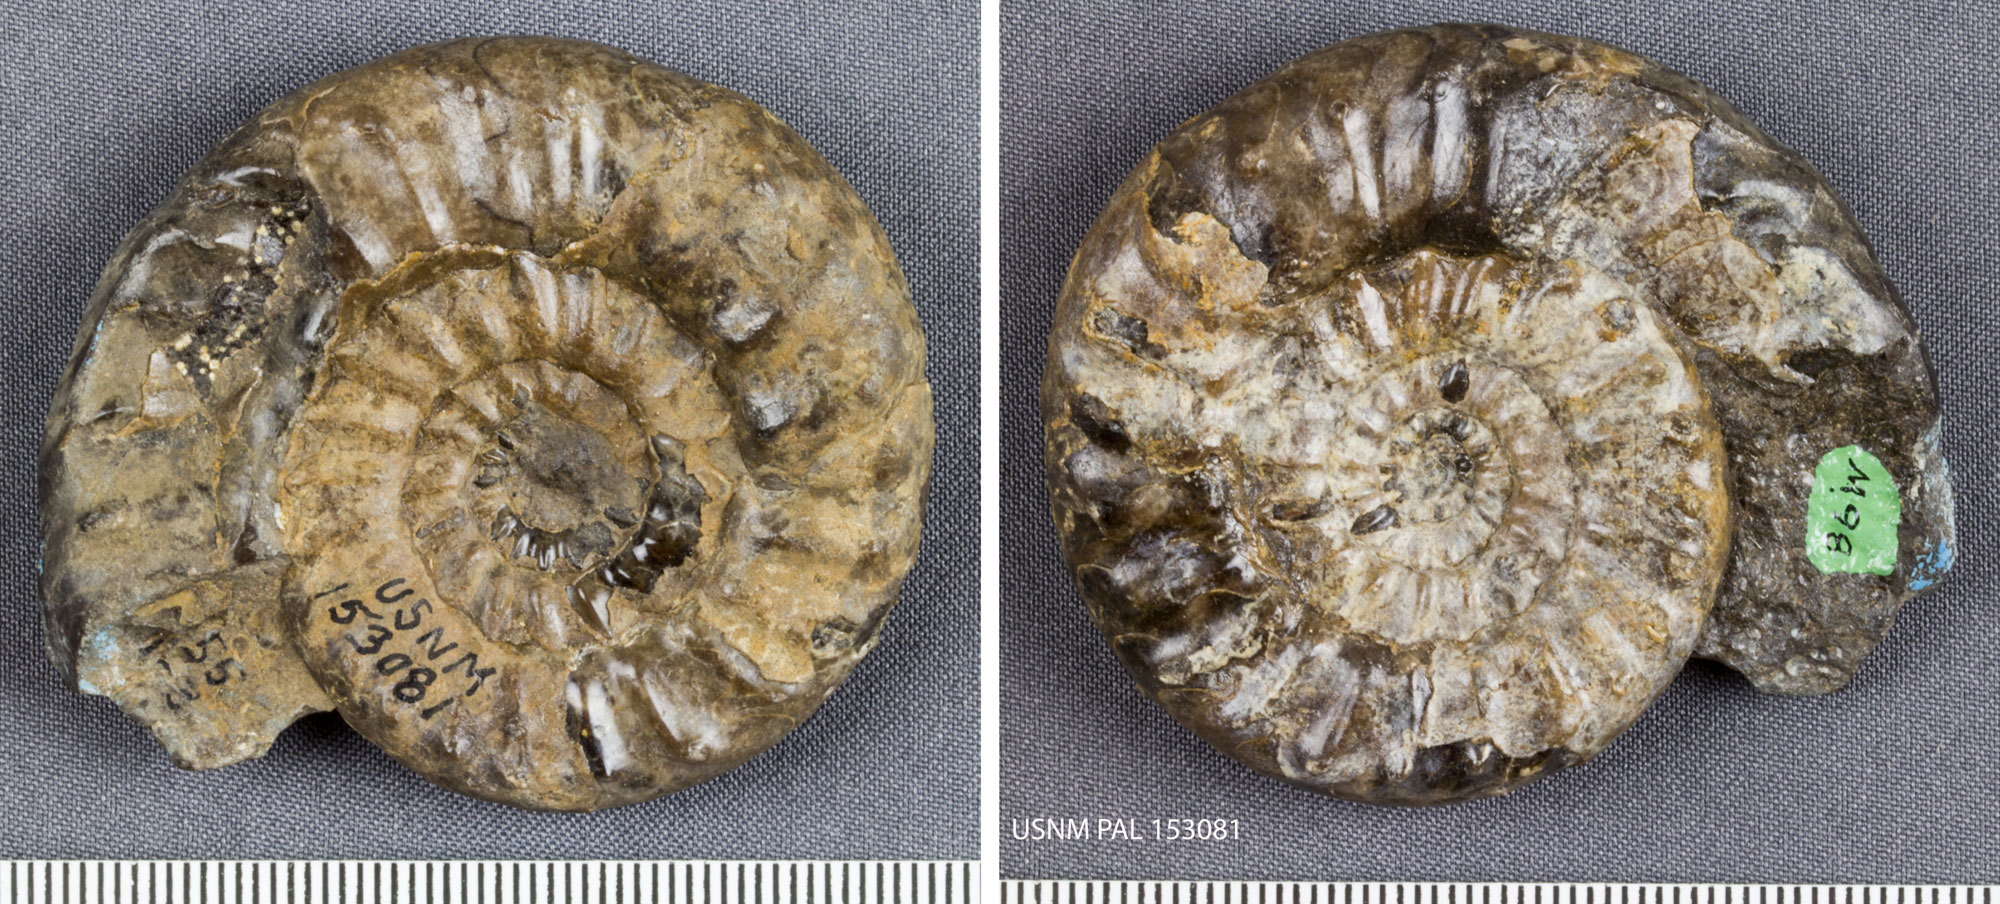 2-Panel figure showing photographs of an ammonoid shell from the Triassic Thaynes Formation of Idaho. The photos show both sides an single ammonoid shells from the side. The shell spirals in a single plane and has regularly spaced ridges.